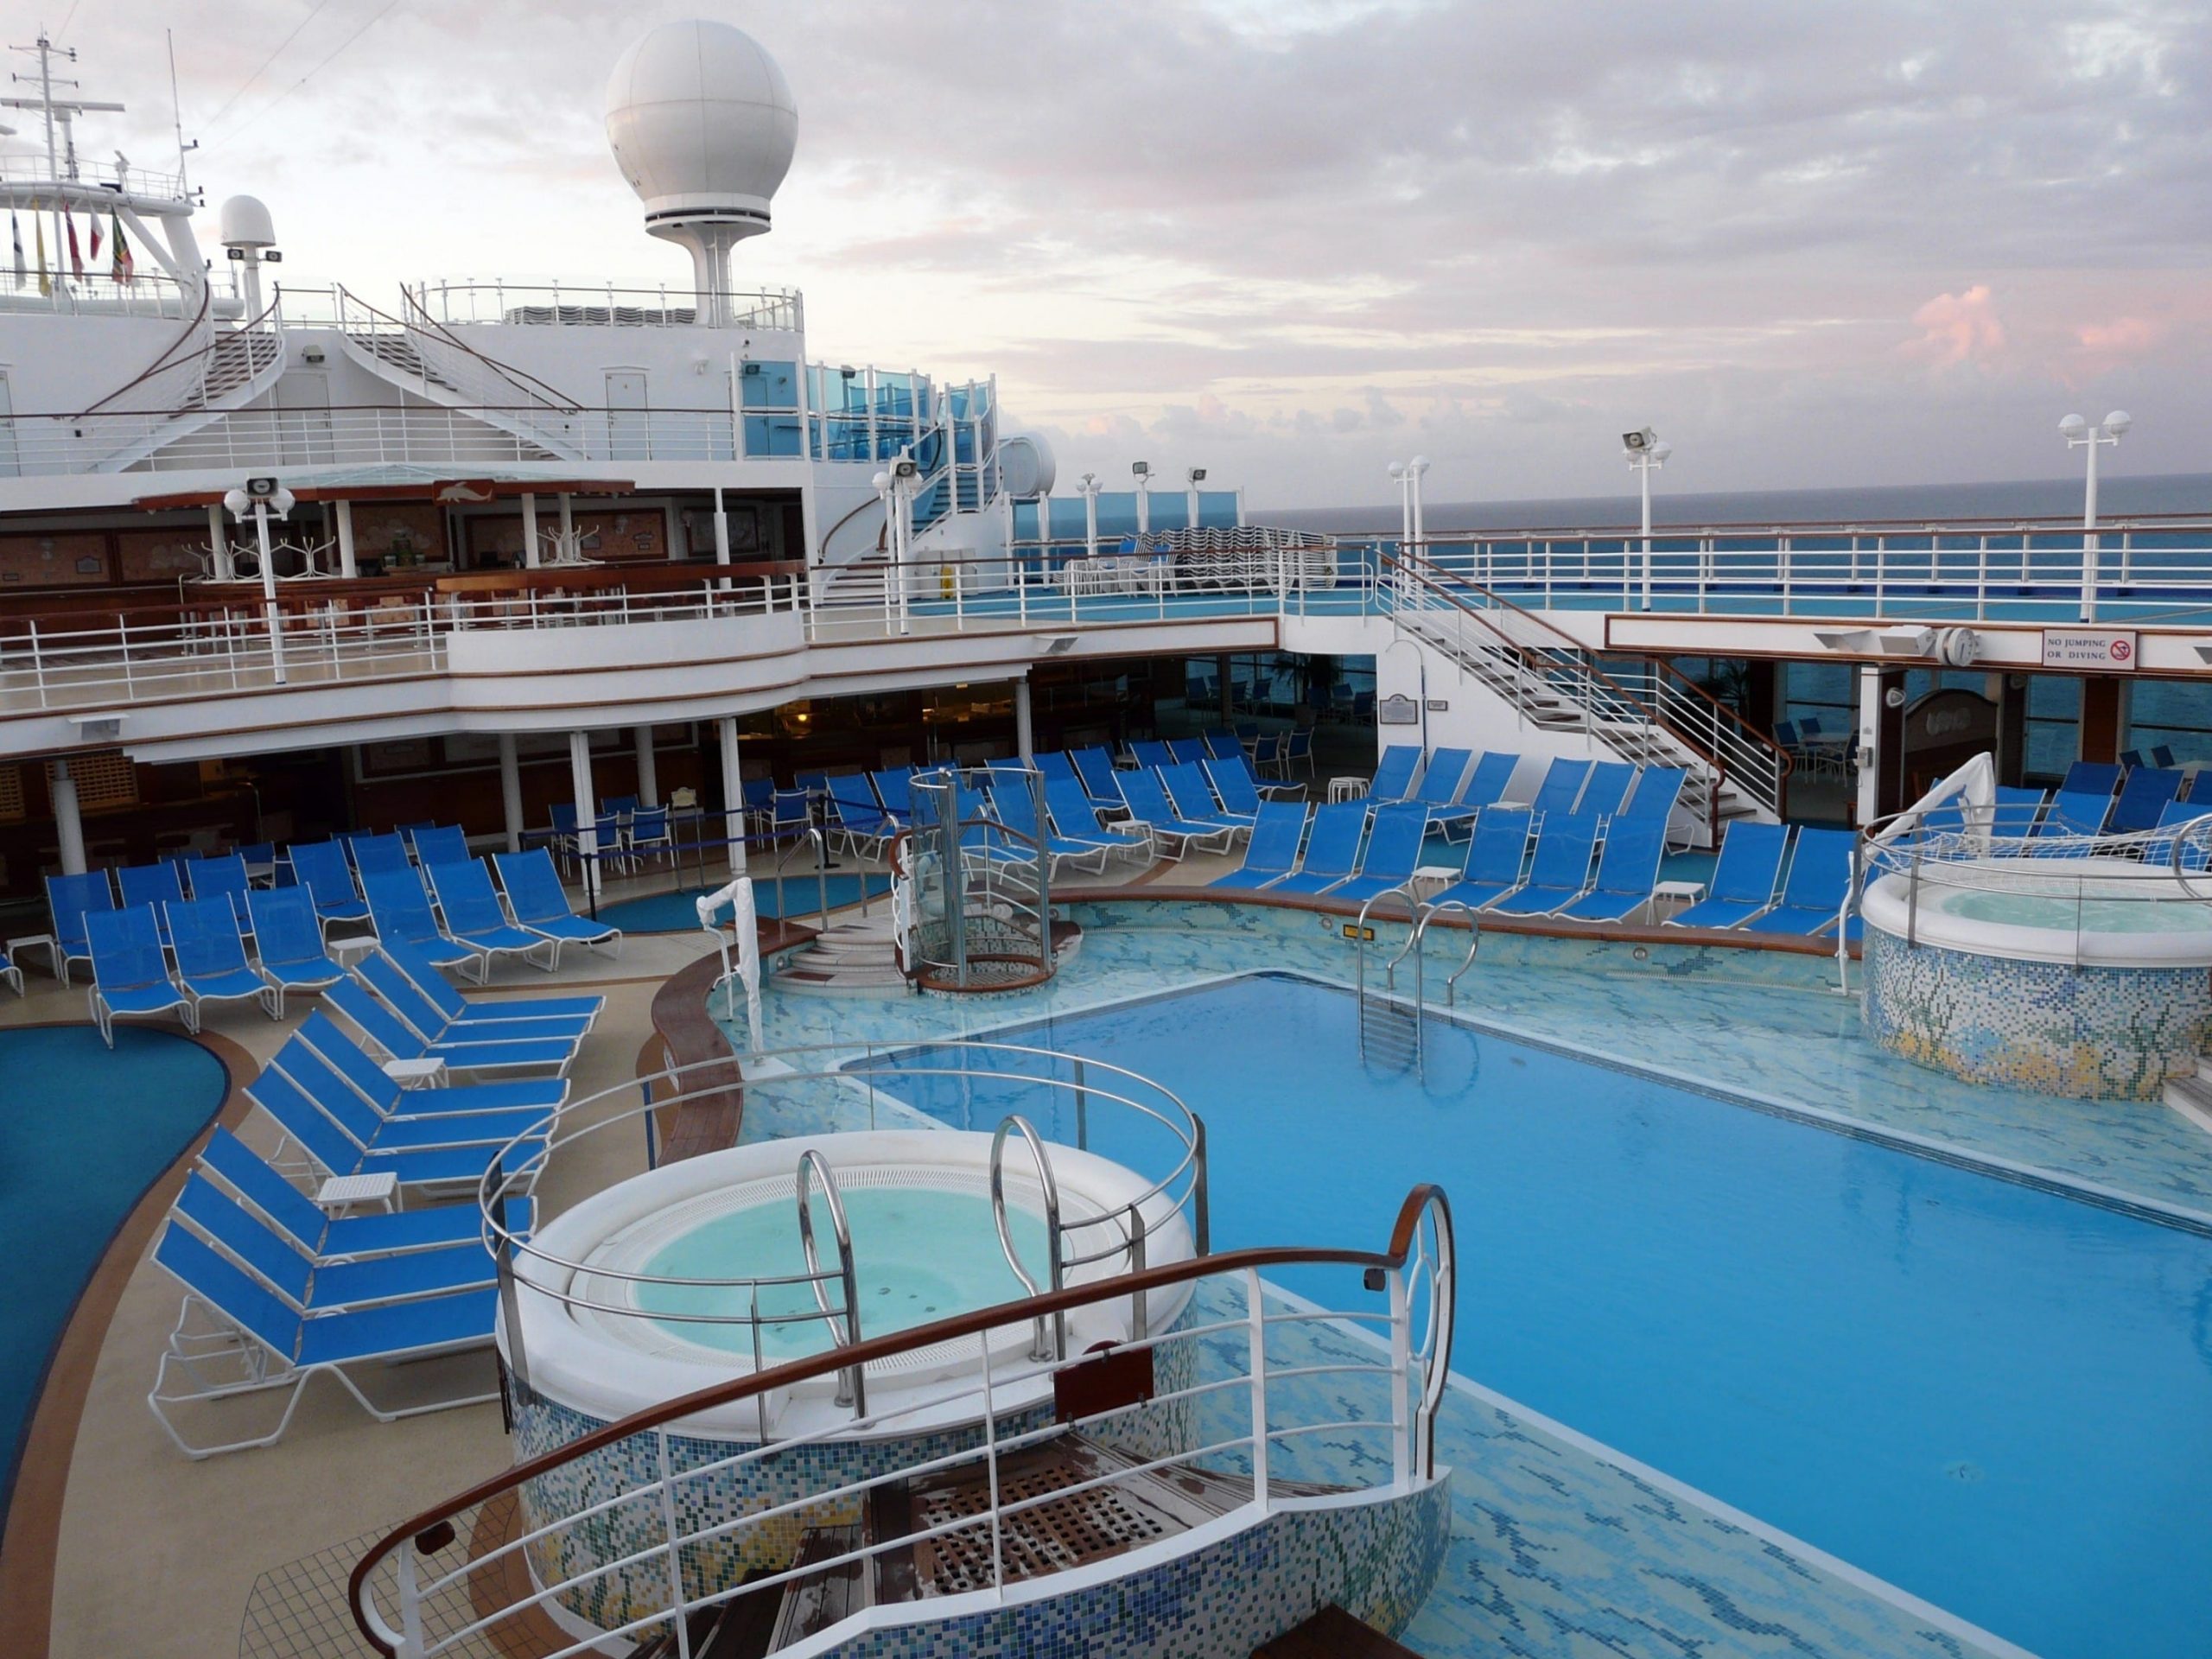 Cruise ship deck with blue chairs and long pool